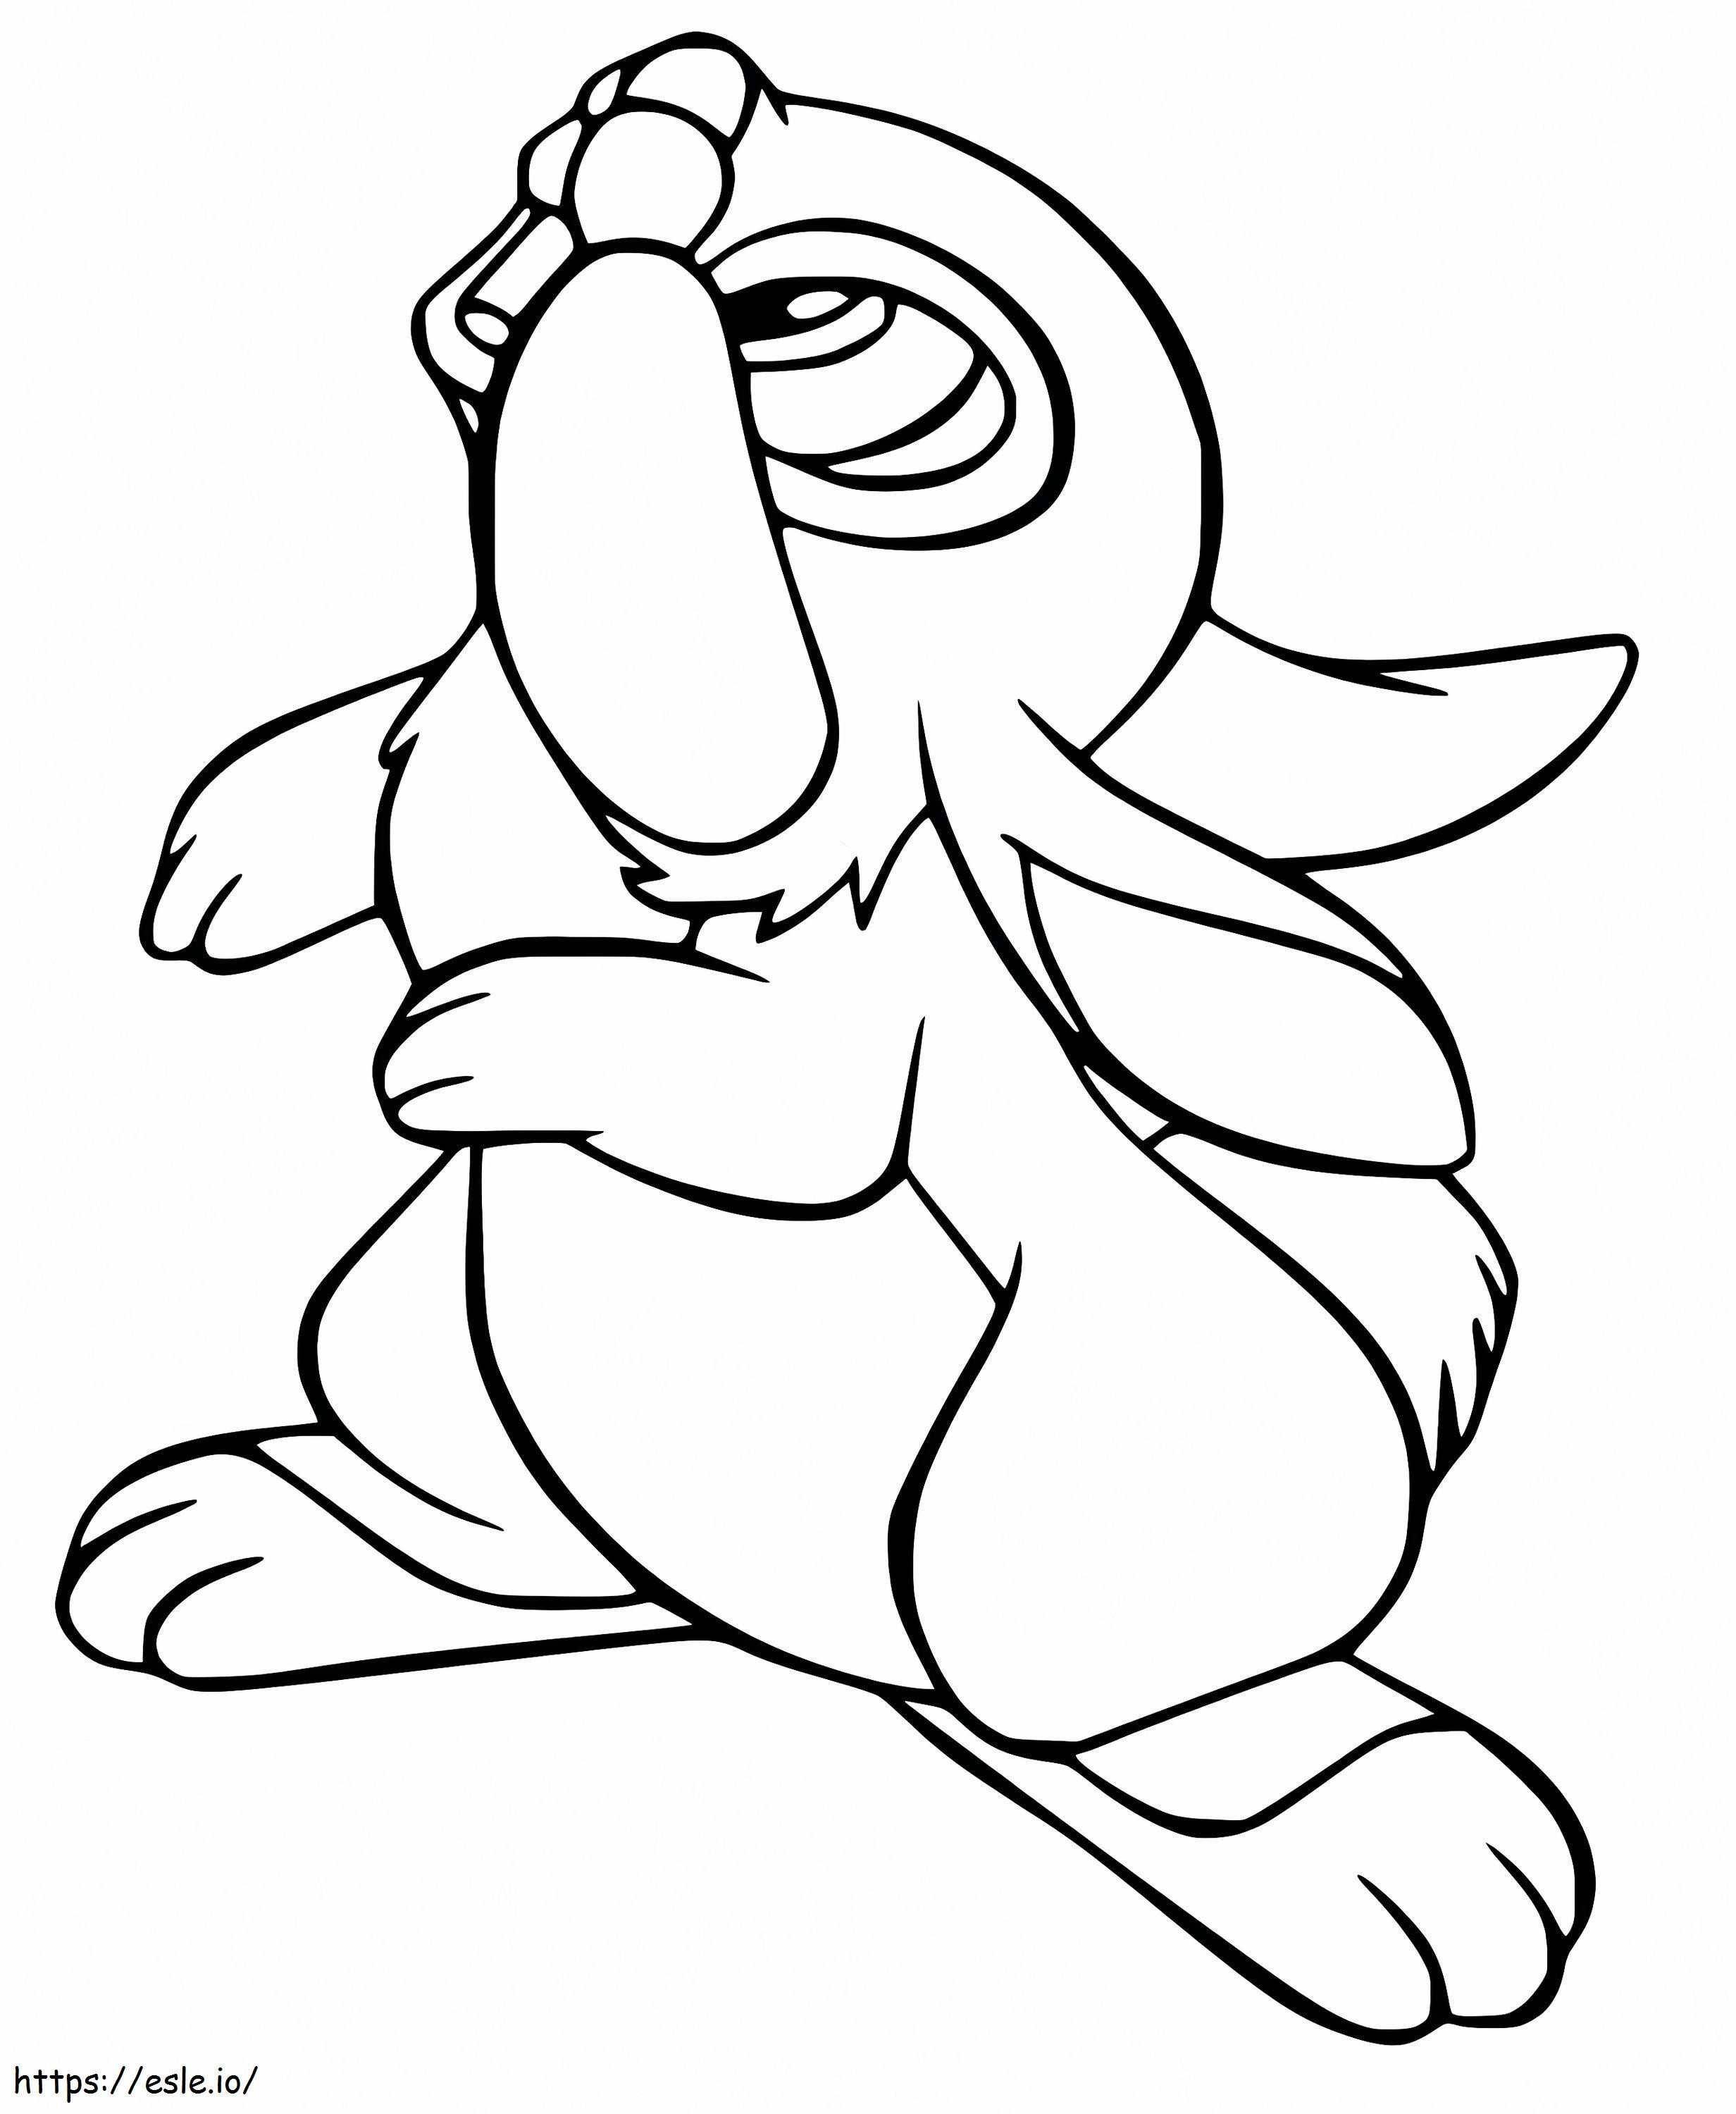 Thumper Rabbit coloring page